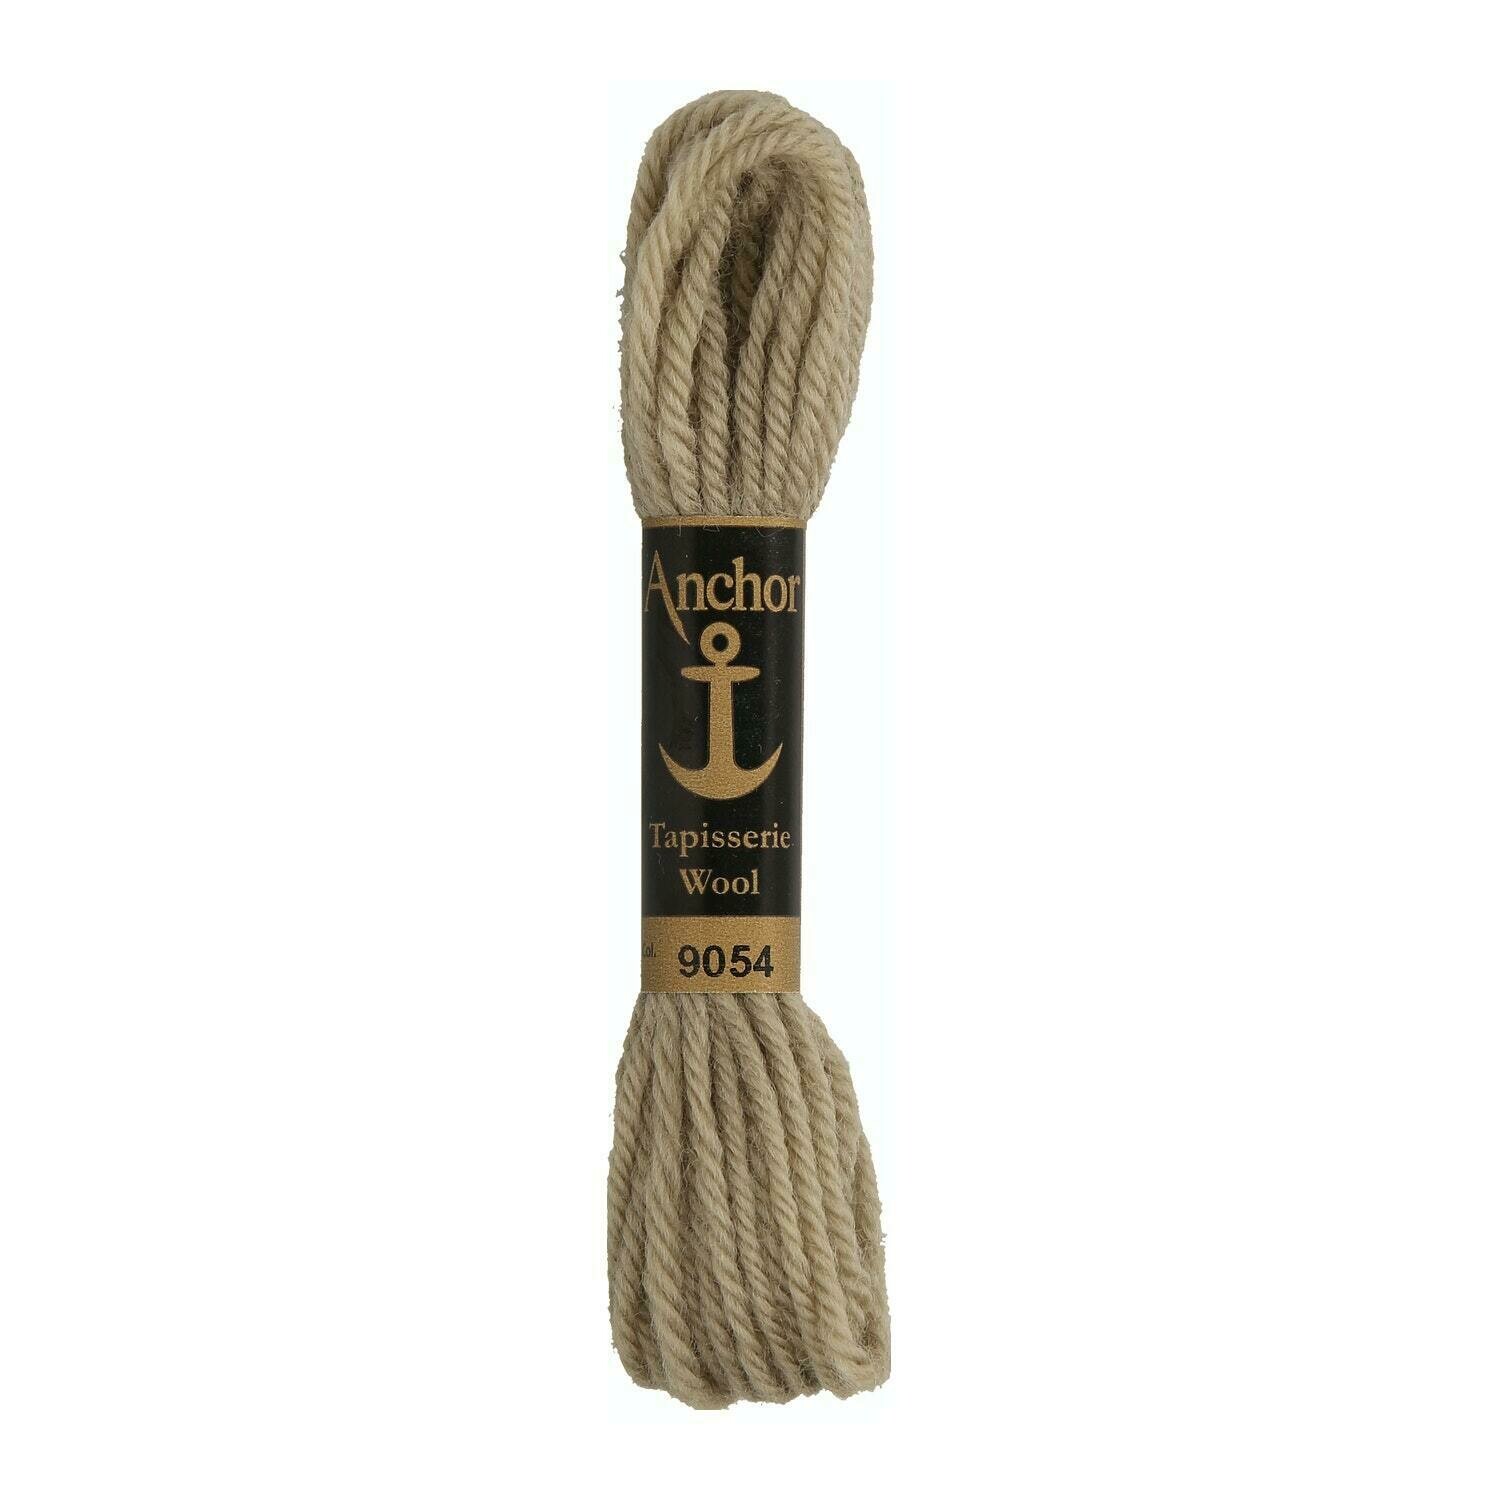 Anchor Tapisserie Wool #09054